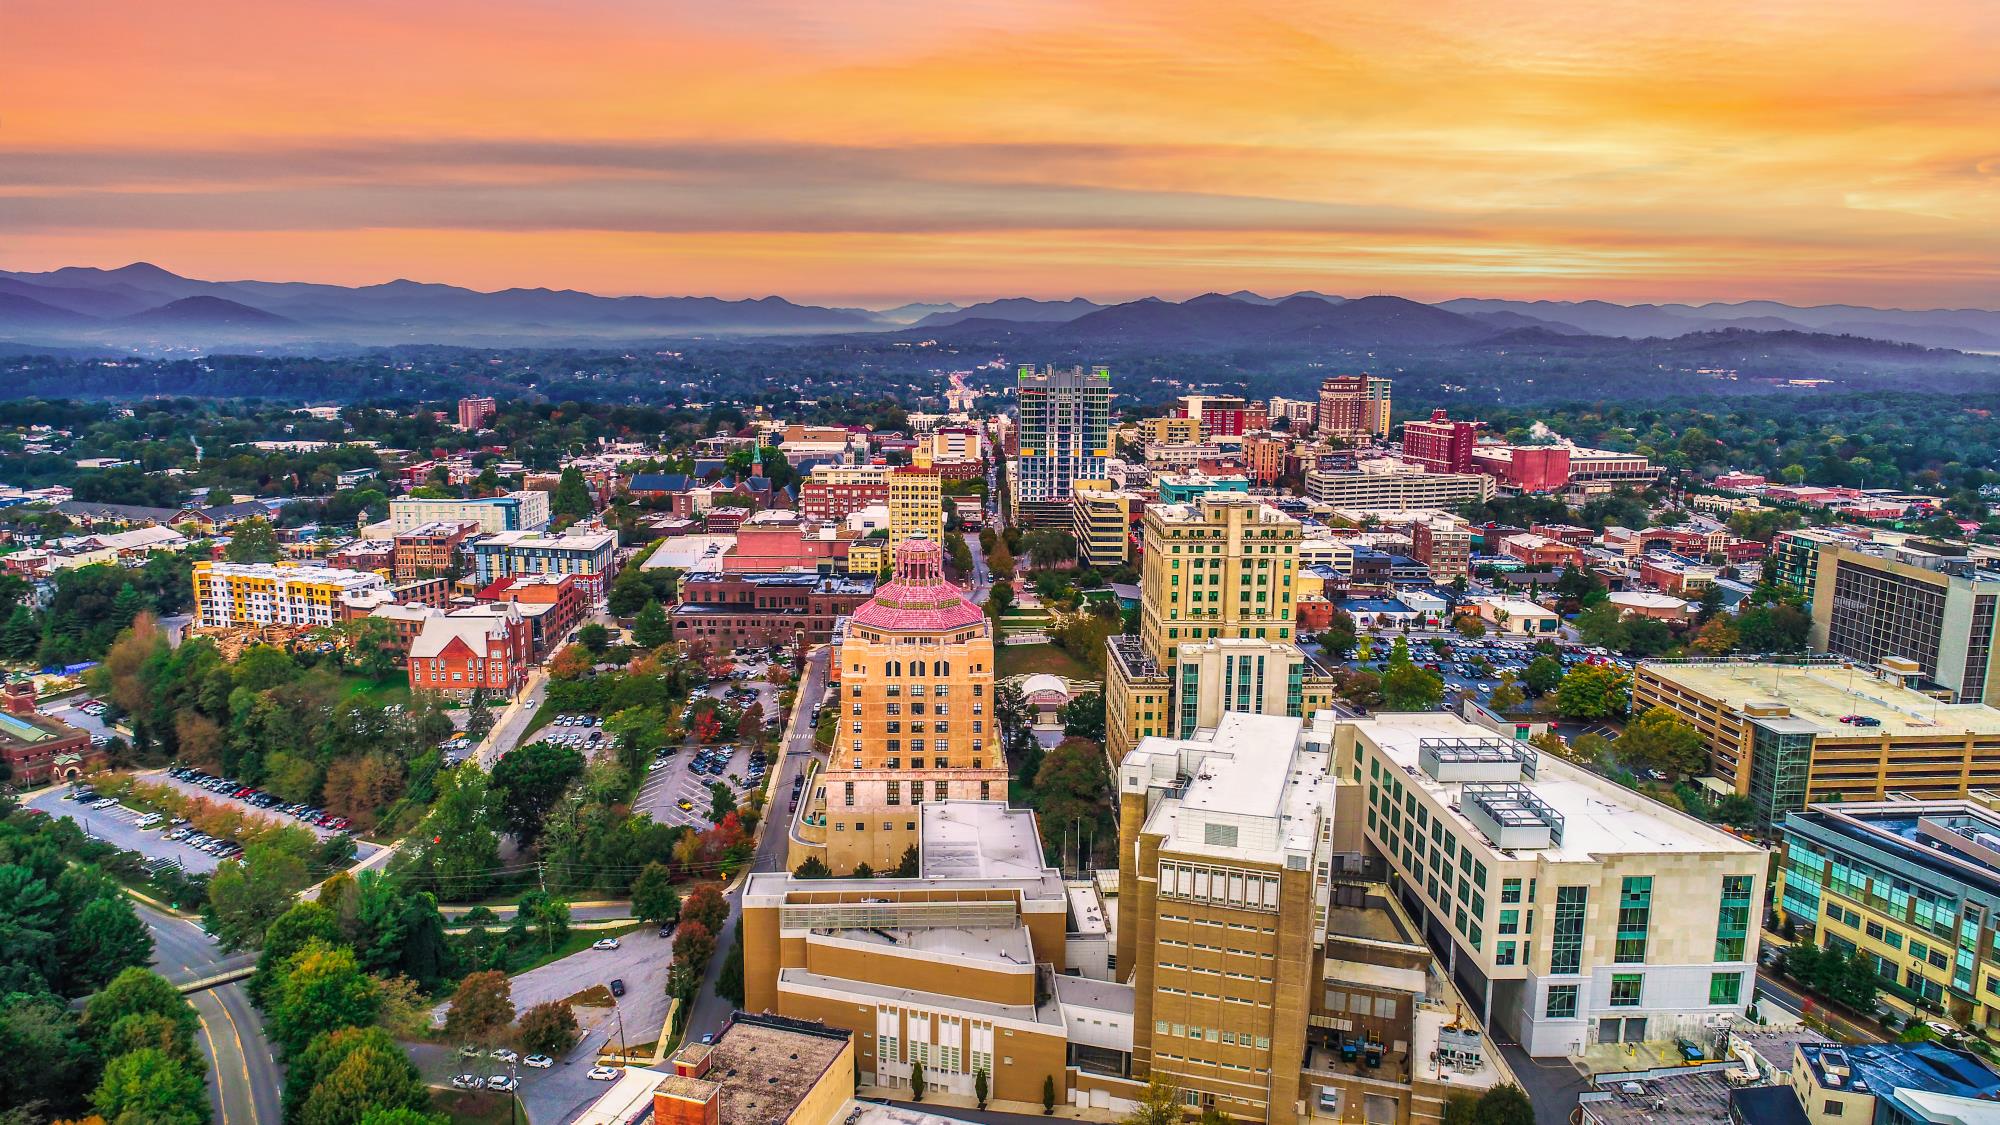 Downtown Asheville, NC skyline aerial